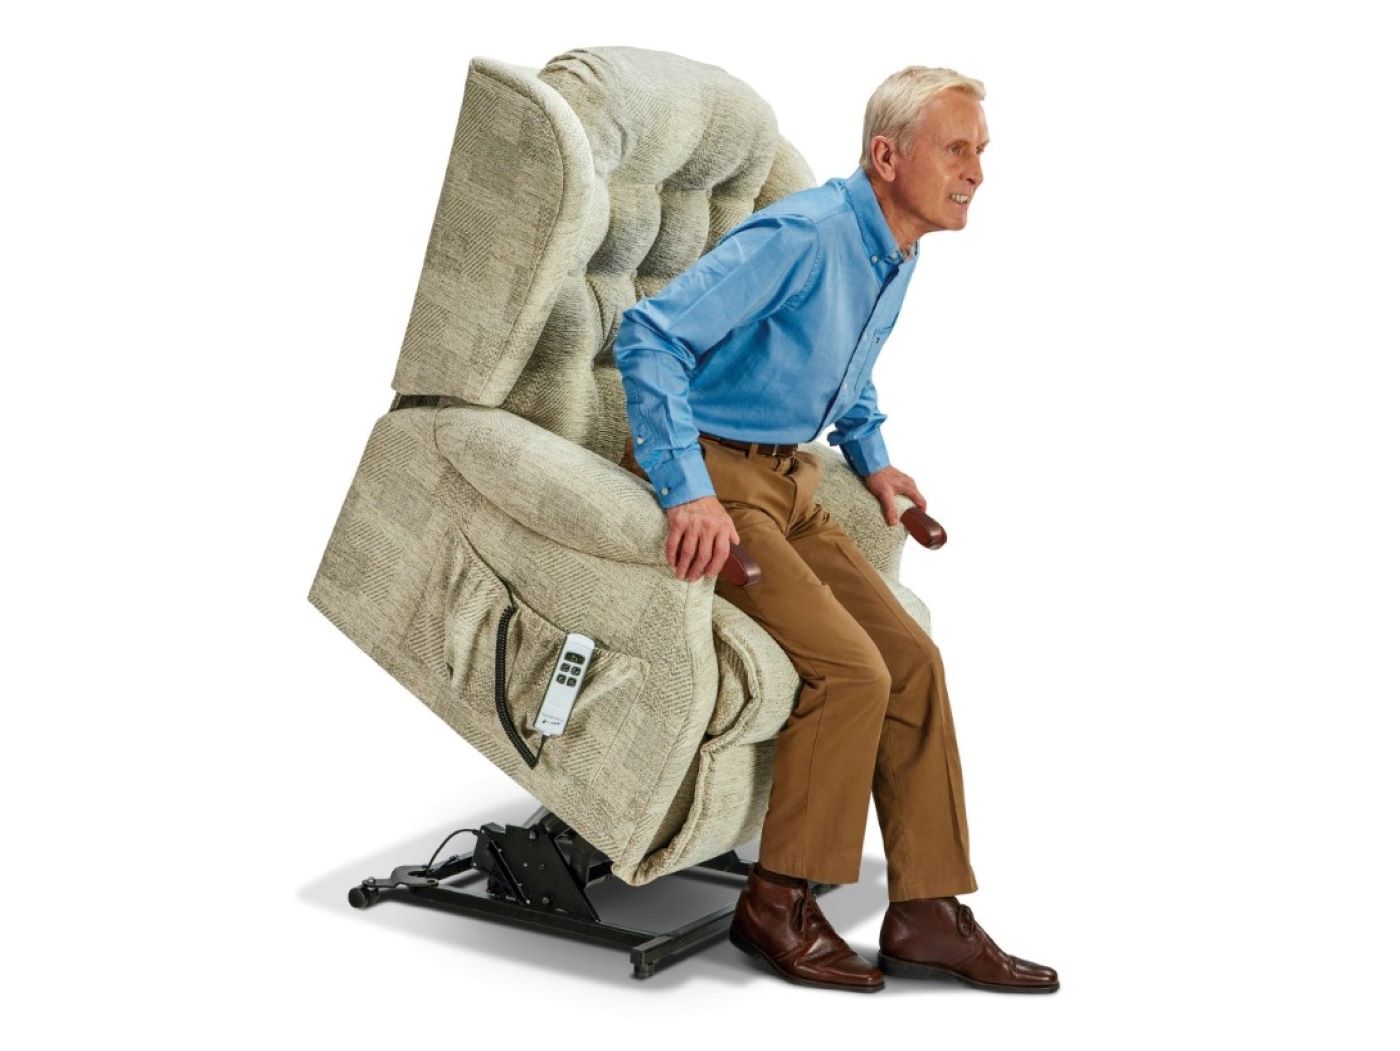 lincoln knuckle riser recliner